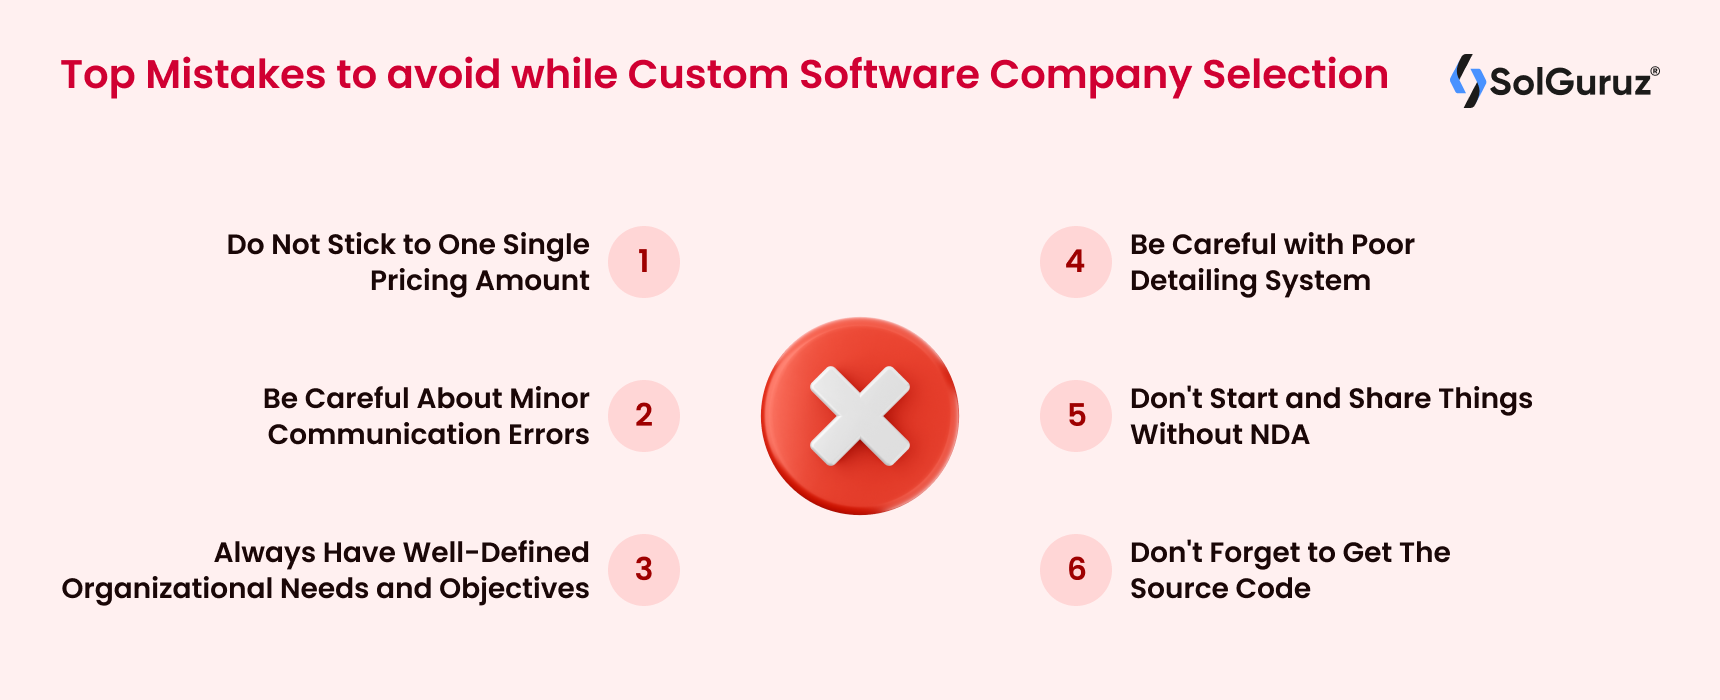 Top Mistakes to avoid Avoid While Selecting a Custom Software Development Company